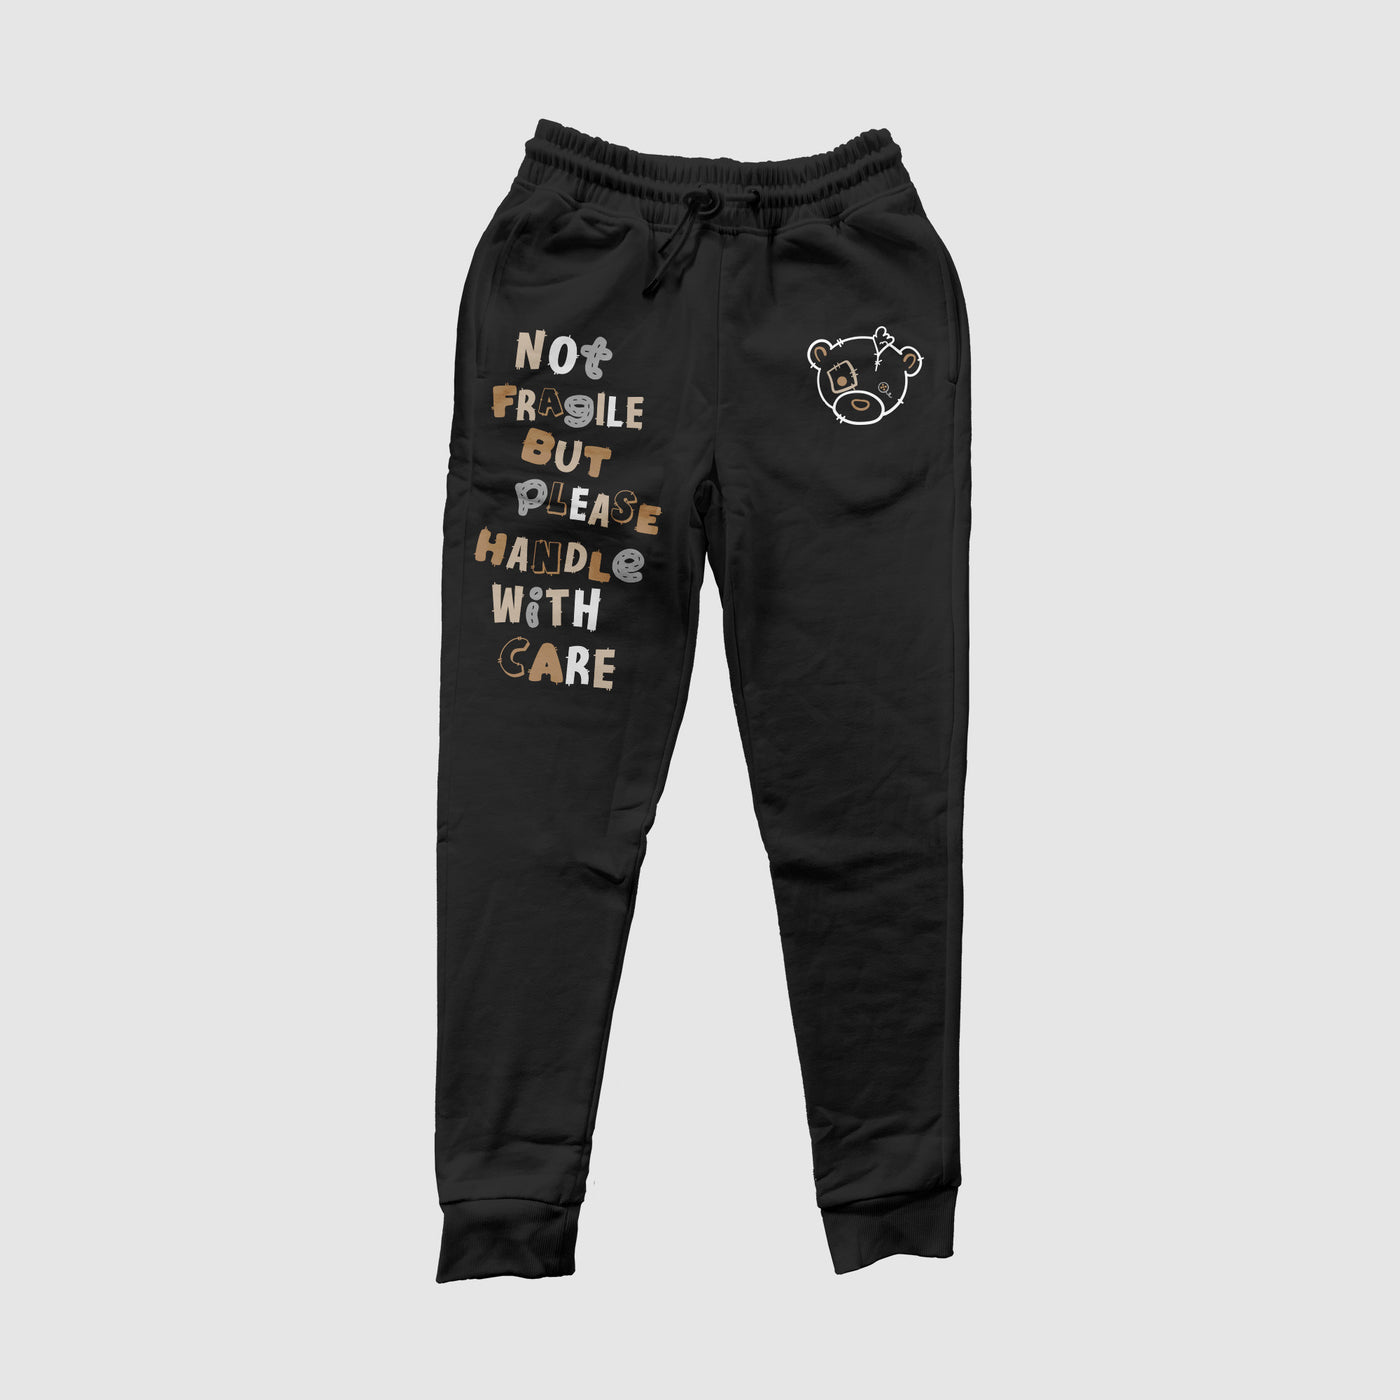 Not Fragile But Please Handle With Care Joggers



10% Donated to our Non-Profit Mental Health Awareness Partners
8.5 oz./yd² (US) 14.2 oz./L yd (CA) 80/20 Cotton/Polyester Blend Fleece
Ringspun Cotton with 100% DREAM Clothing 